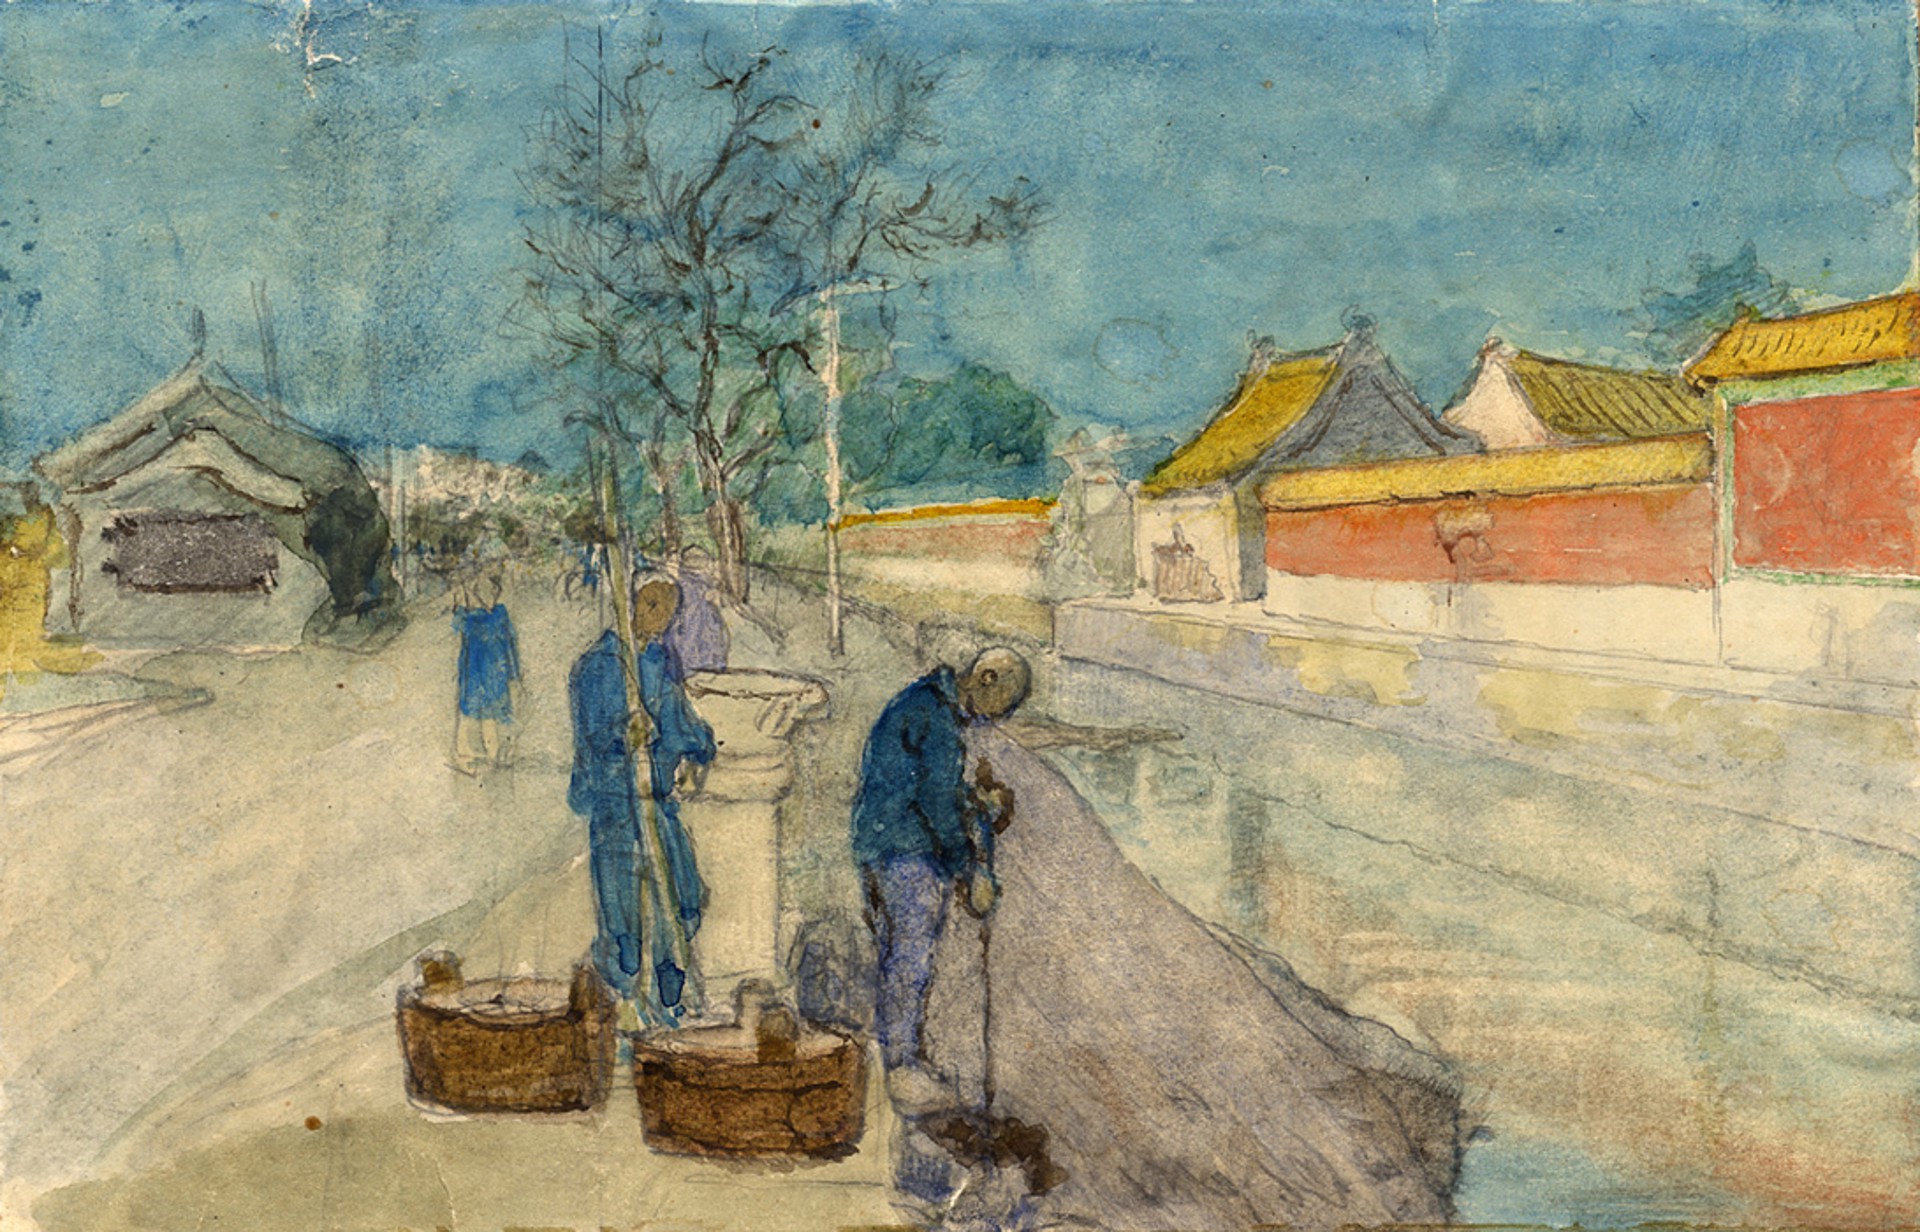 Chinese Workmen Outside Imperial City Wall by Charles Bartlett